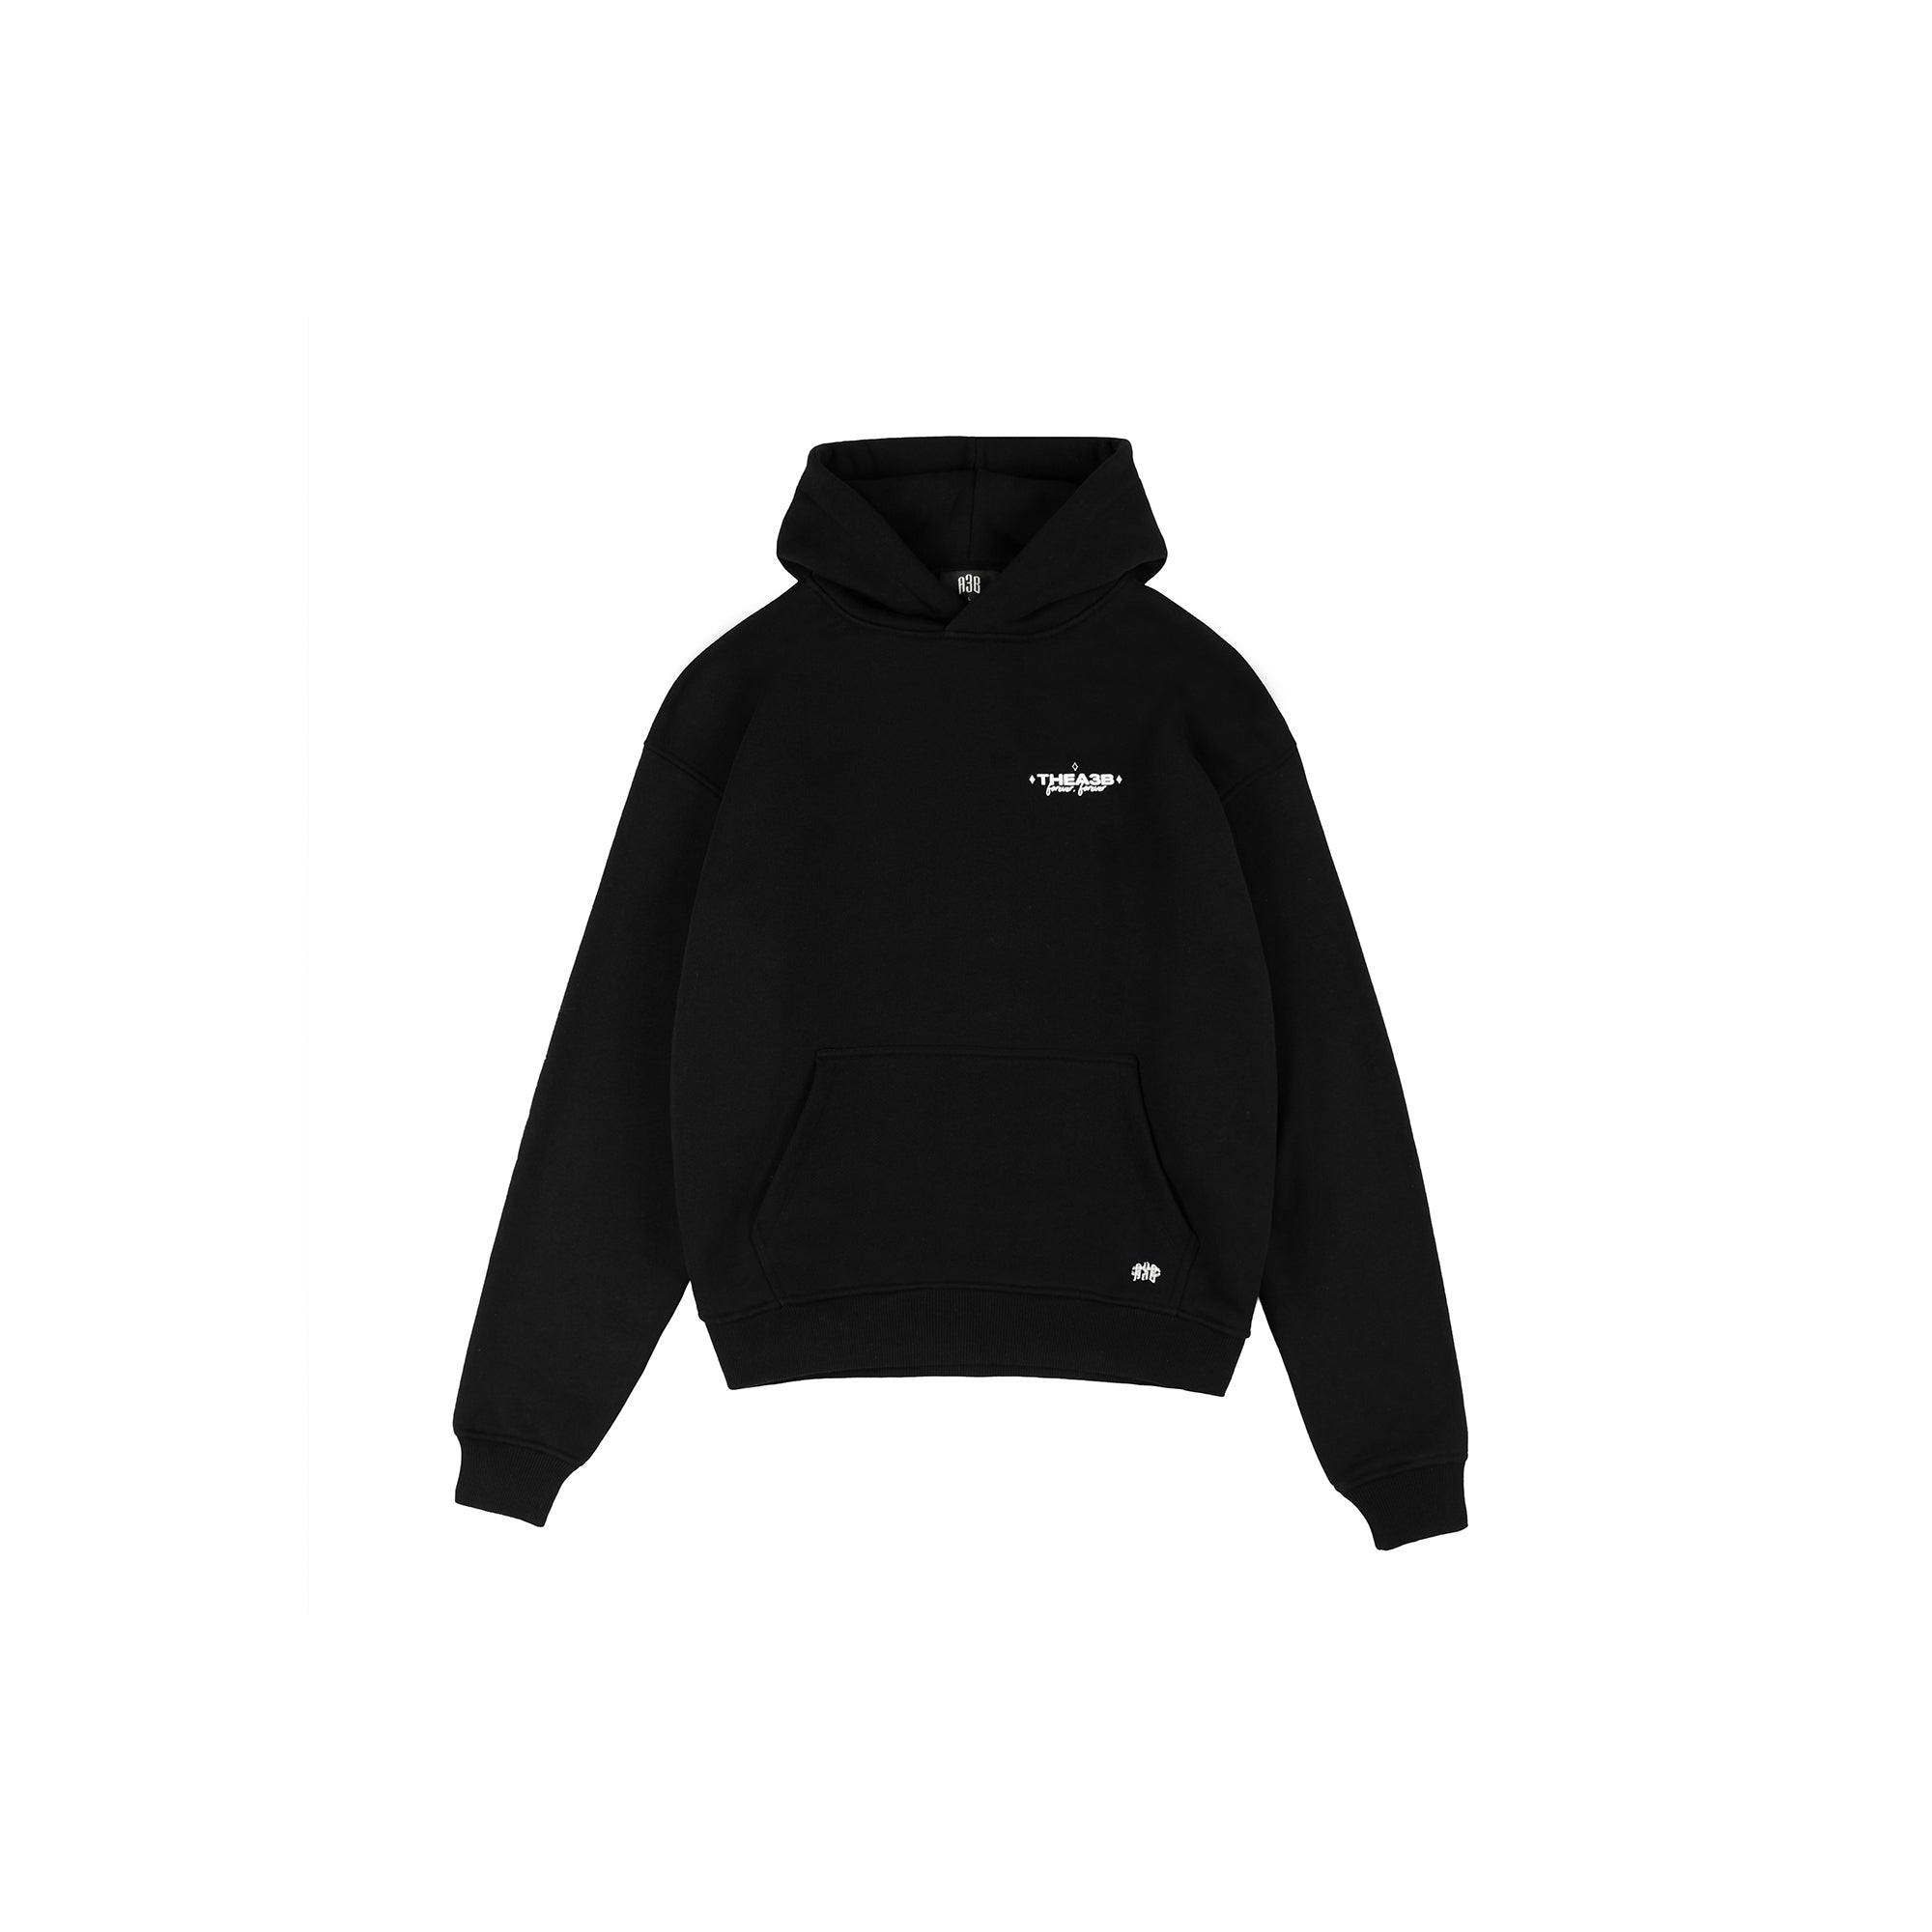 FOREVER, FOREVER HOODIE - BLACK - A3B